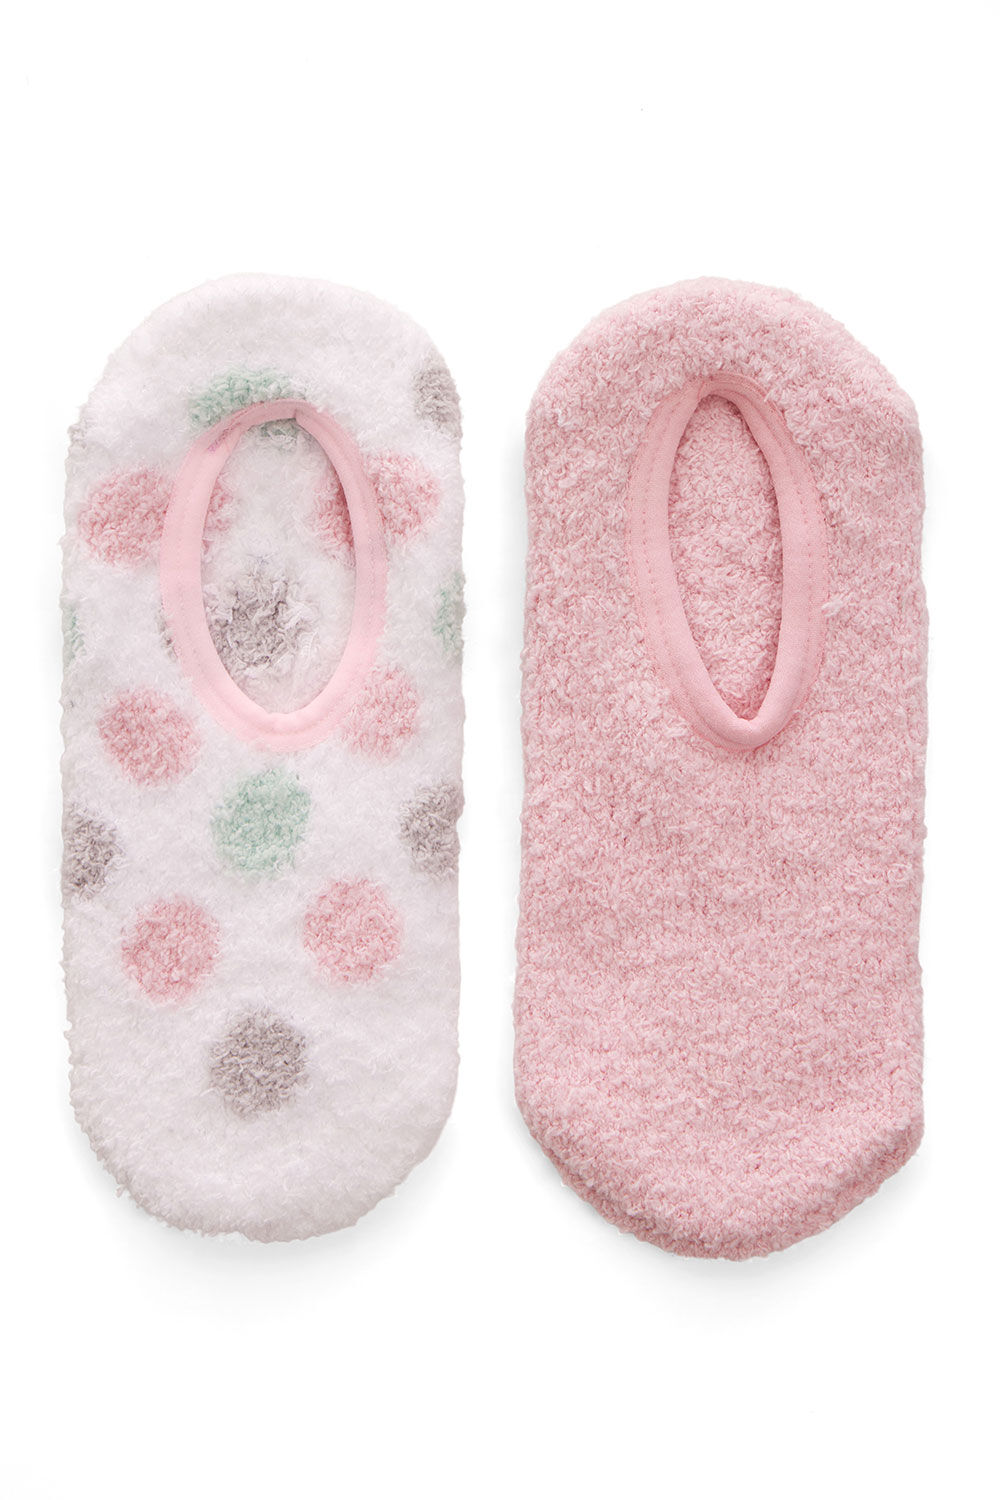 Bonmarche 2 Pack Pink and Spot Cosy Socks